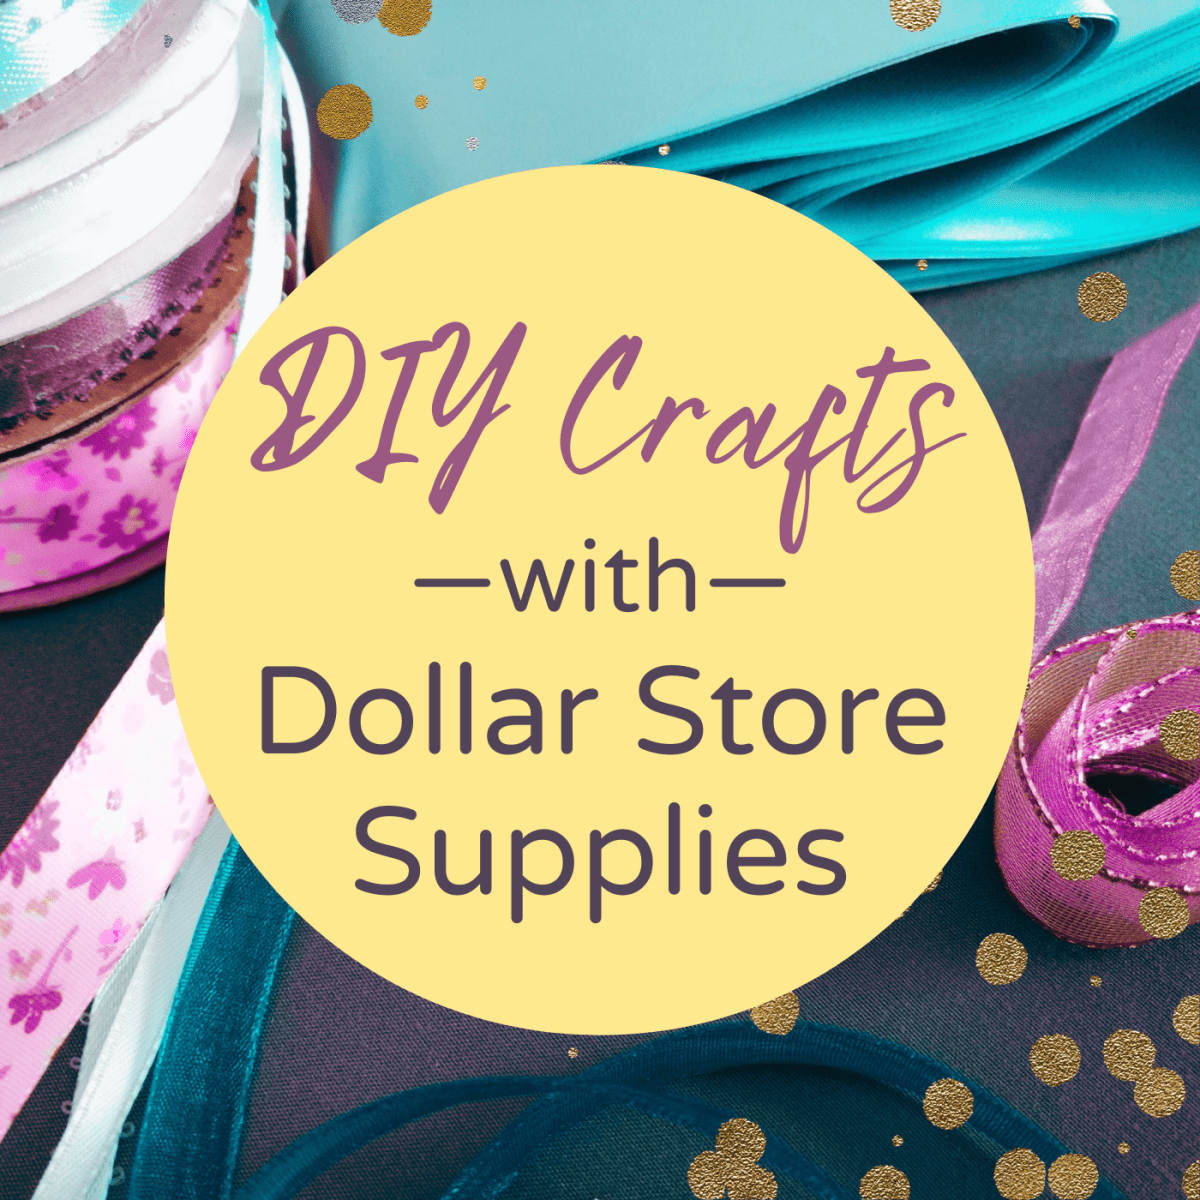 DOLLAR TREE SHOPPING!!! *CUTE CHRISTMAS COOKIE + BAKING STORAGE CONTAINERS*  SO MANY NEW FINDS!!! 